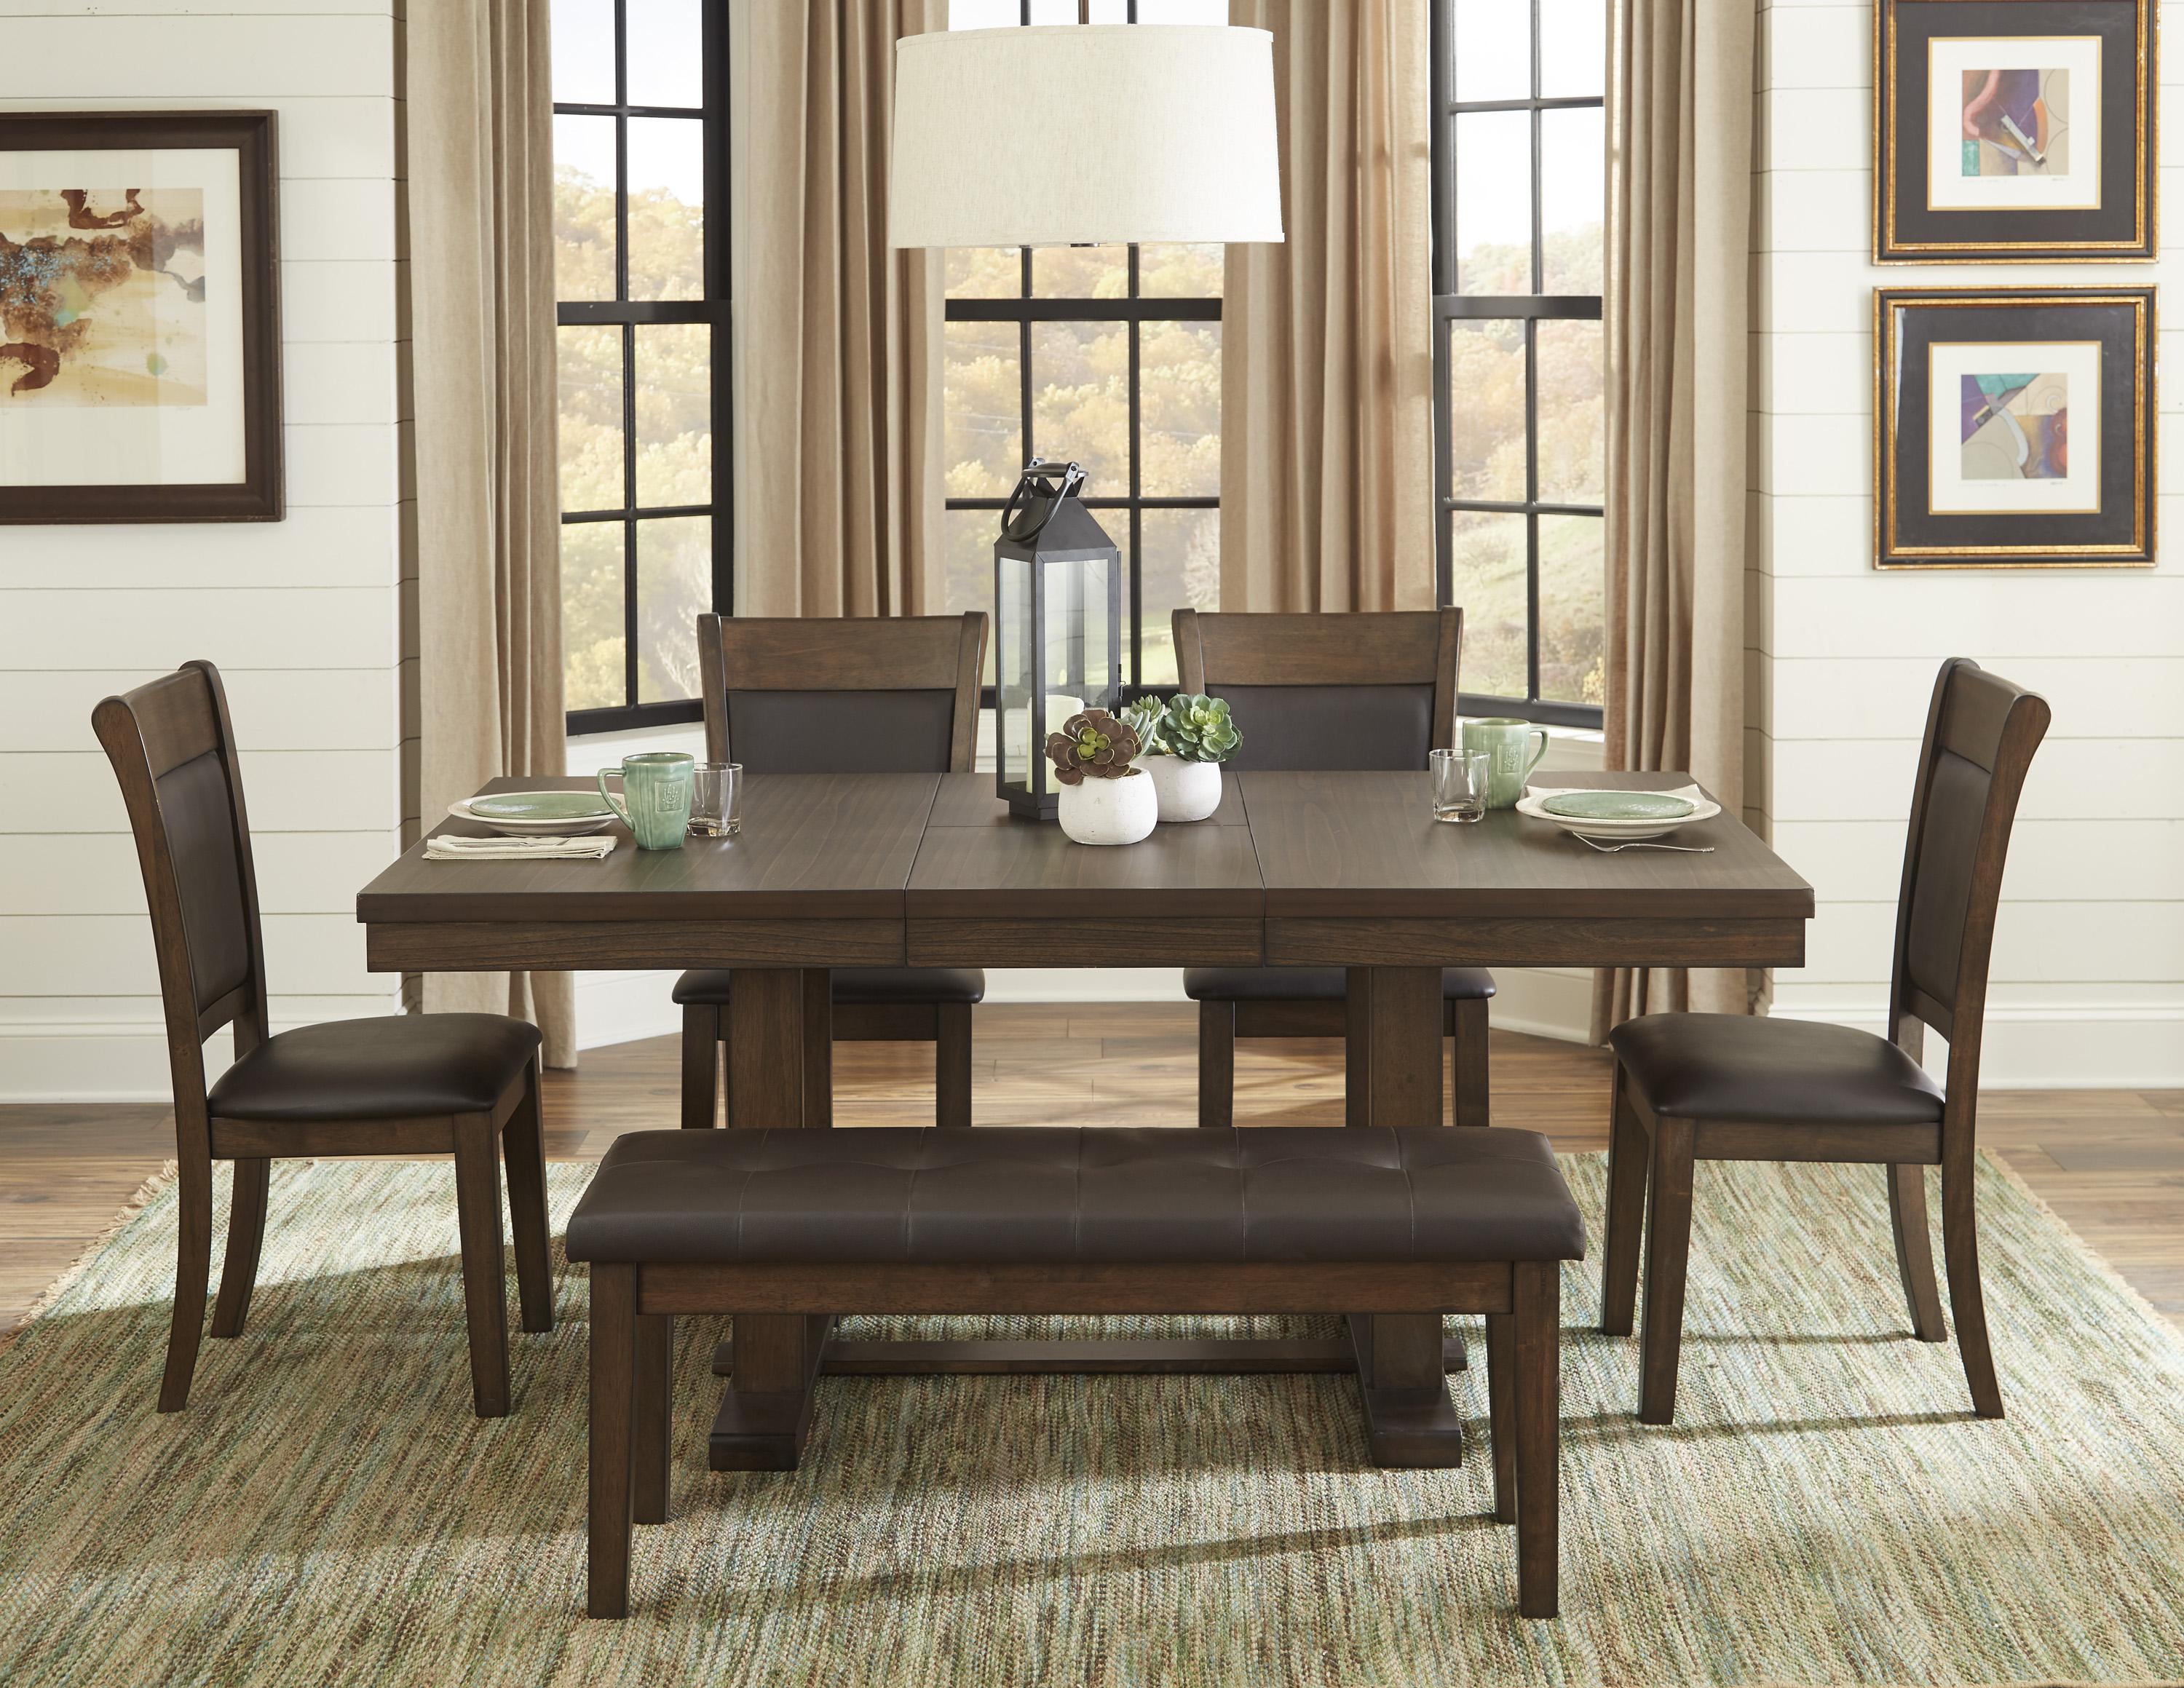 

    
Transitional Light Rustic Brown Wood Bench Homelegance 5614-13 Wieland
